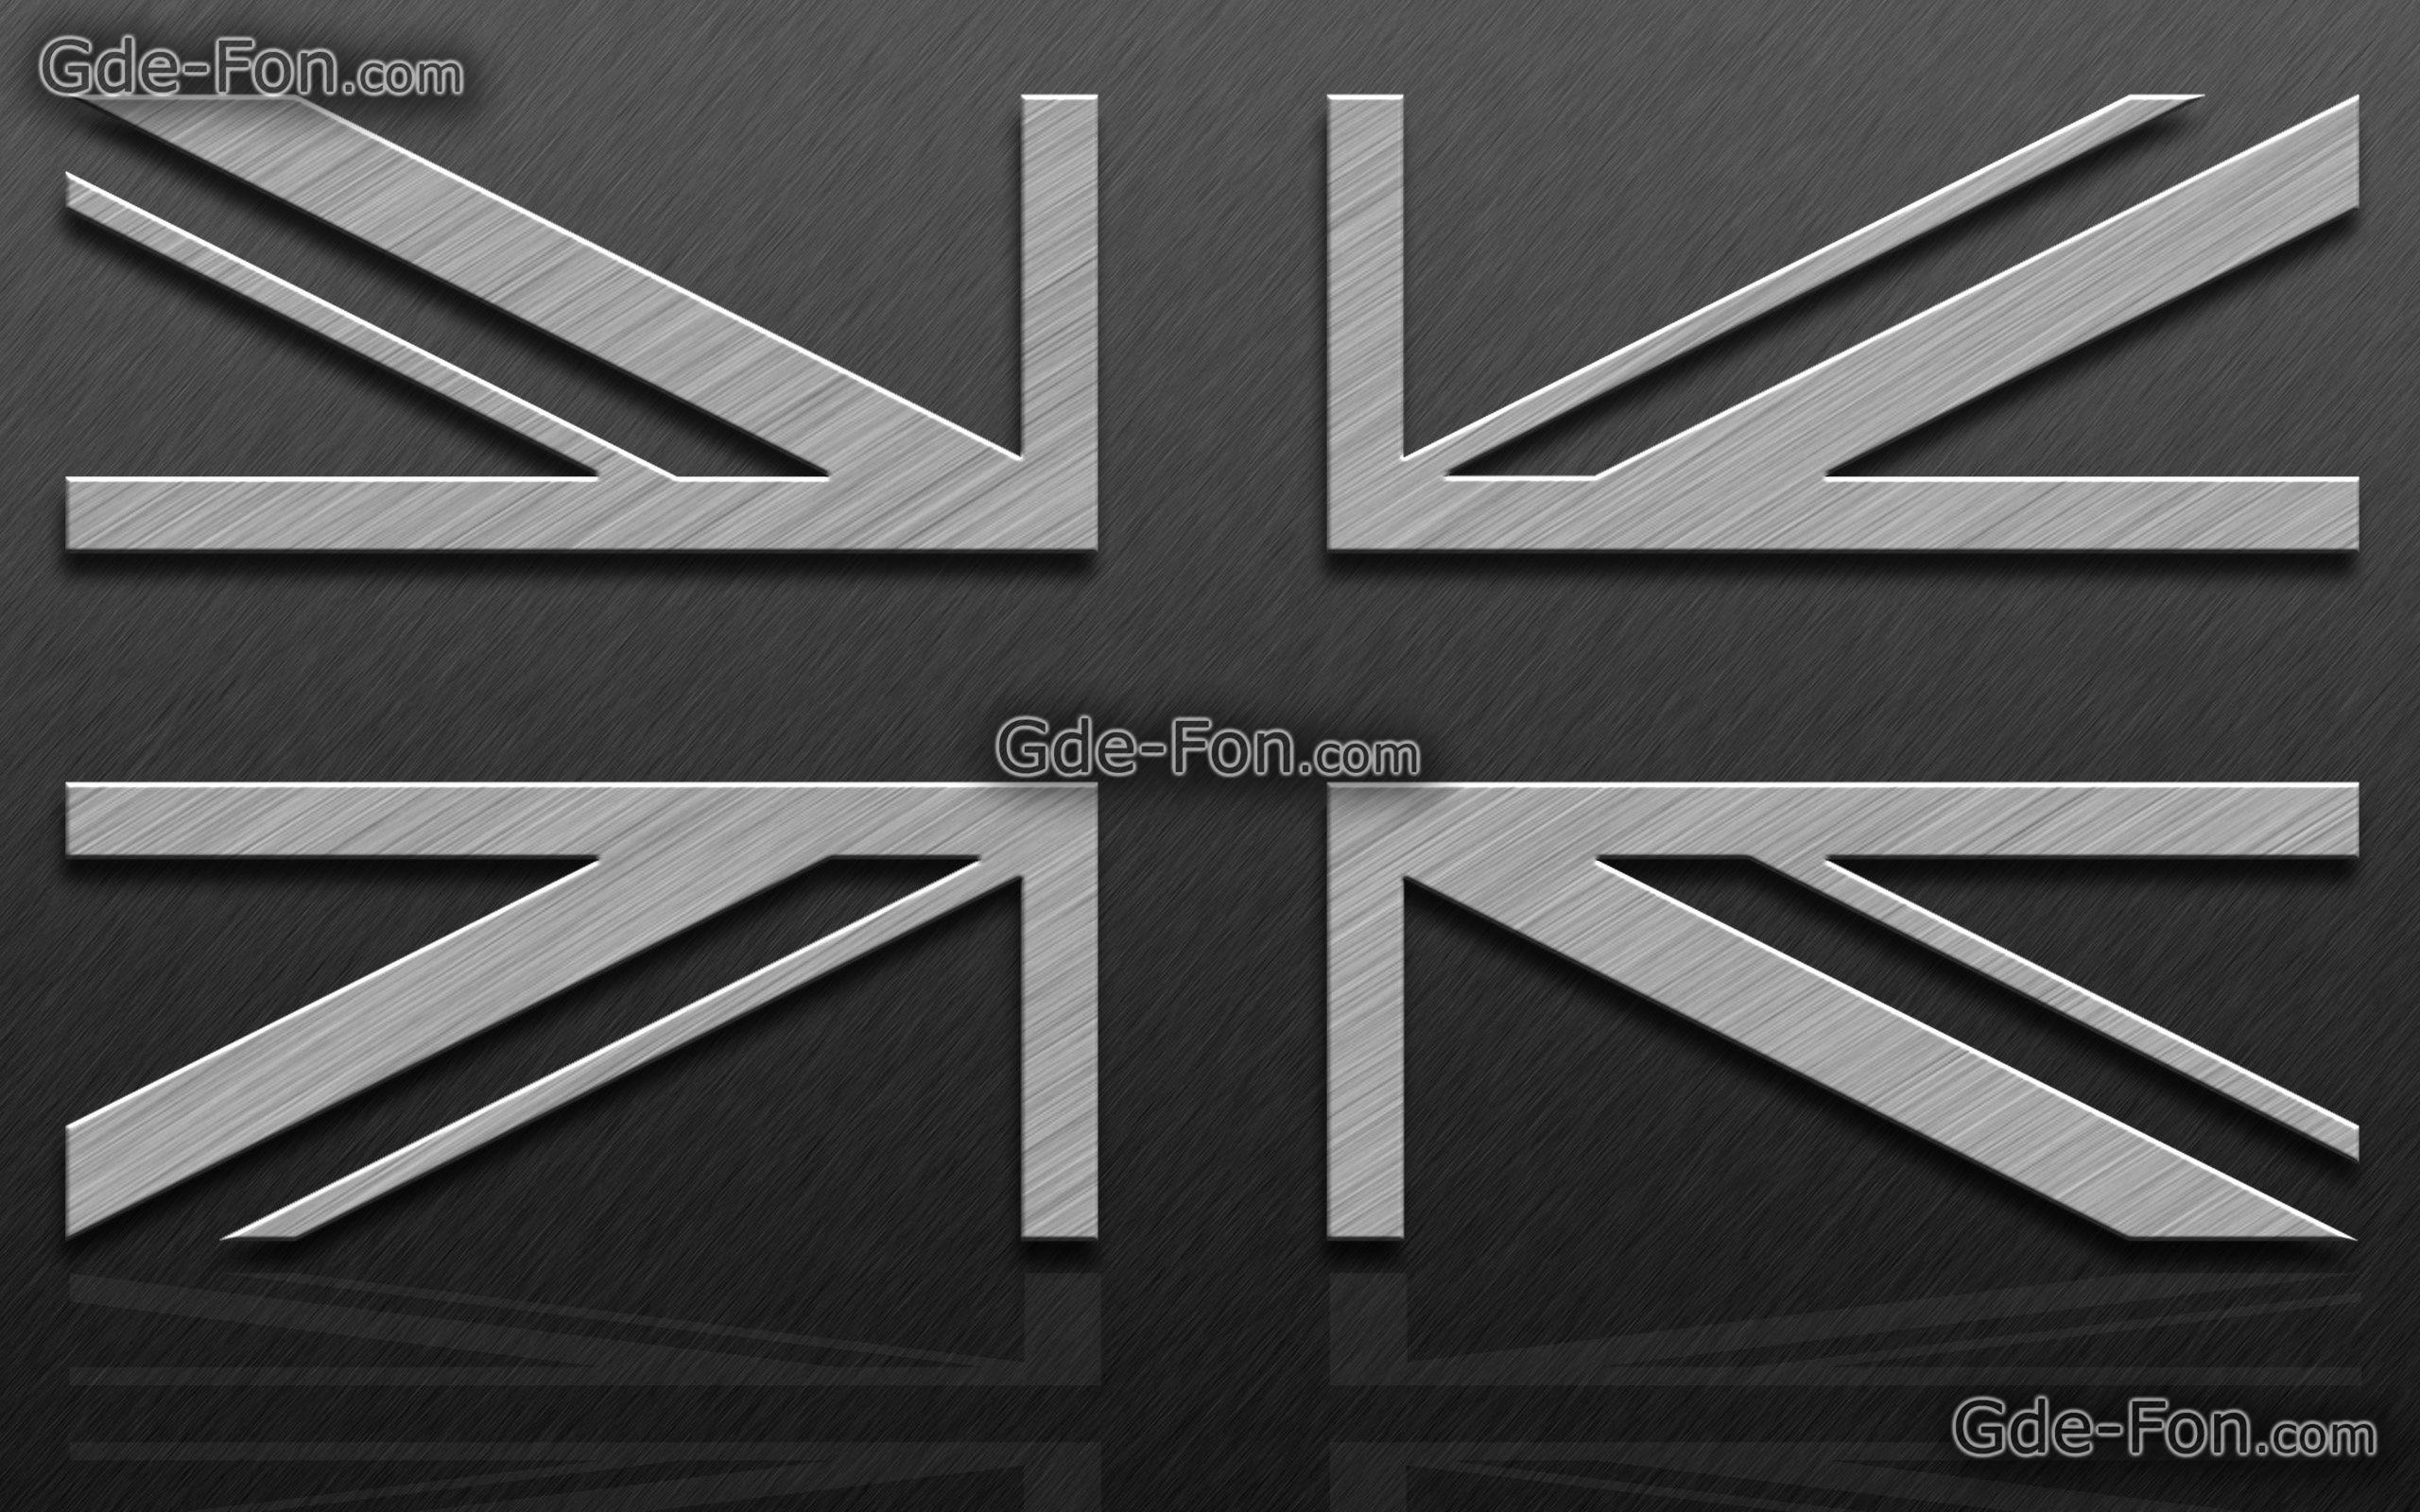 Union Jack Wallpapers - Wallpaper Cave